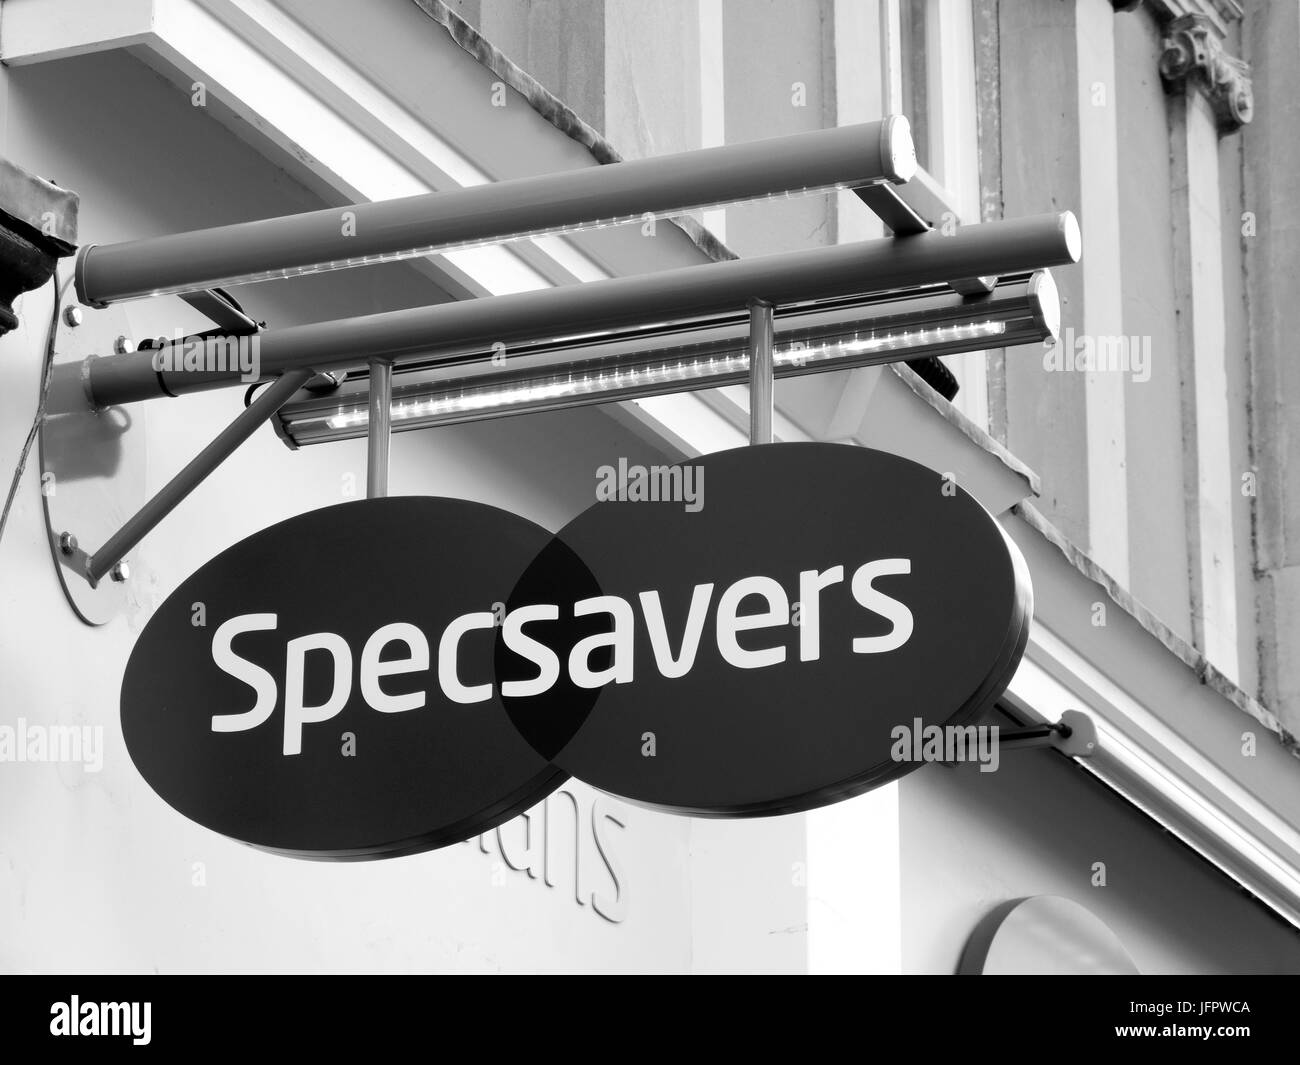 Specsavers Optical Group Limited sign over opticians with over 400 stores worldwide Stock Photo